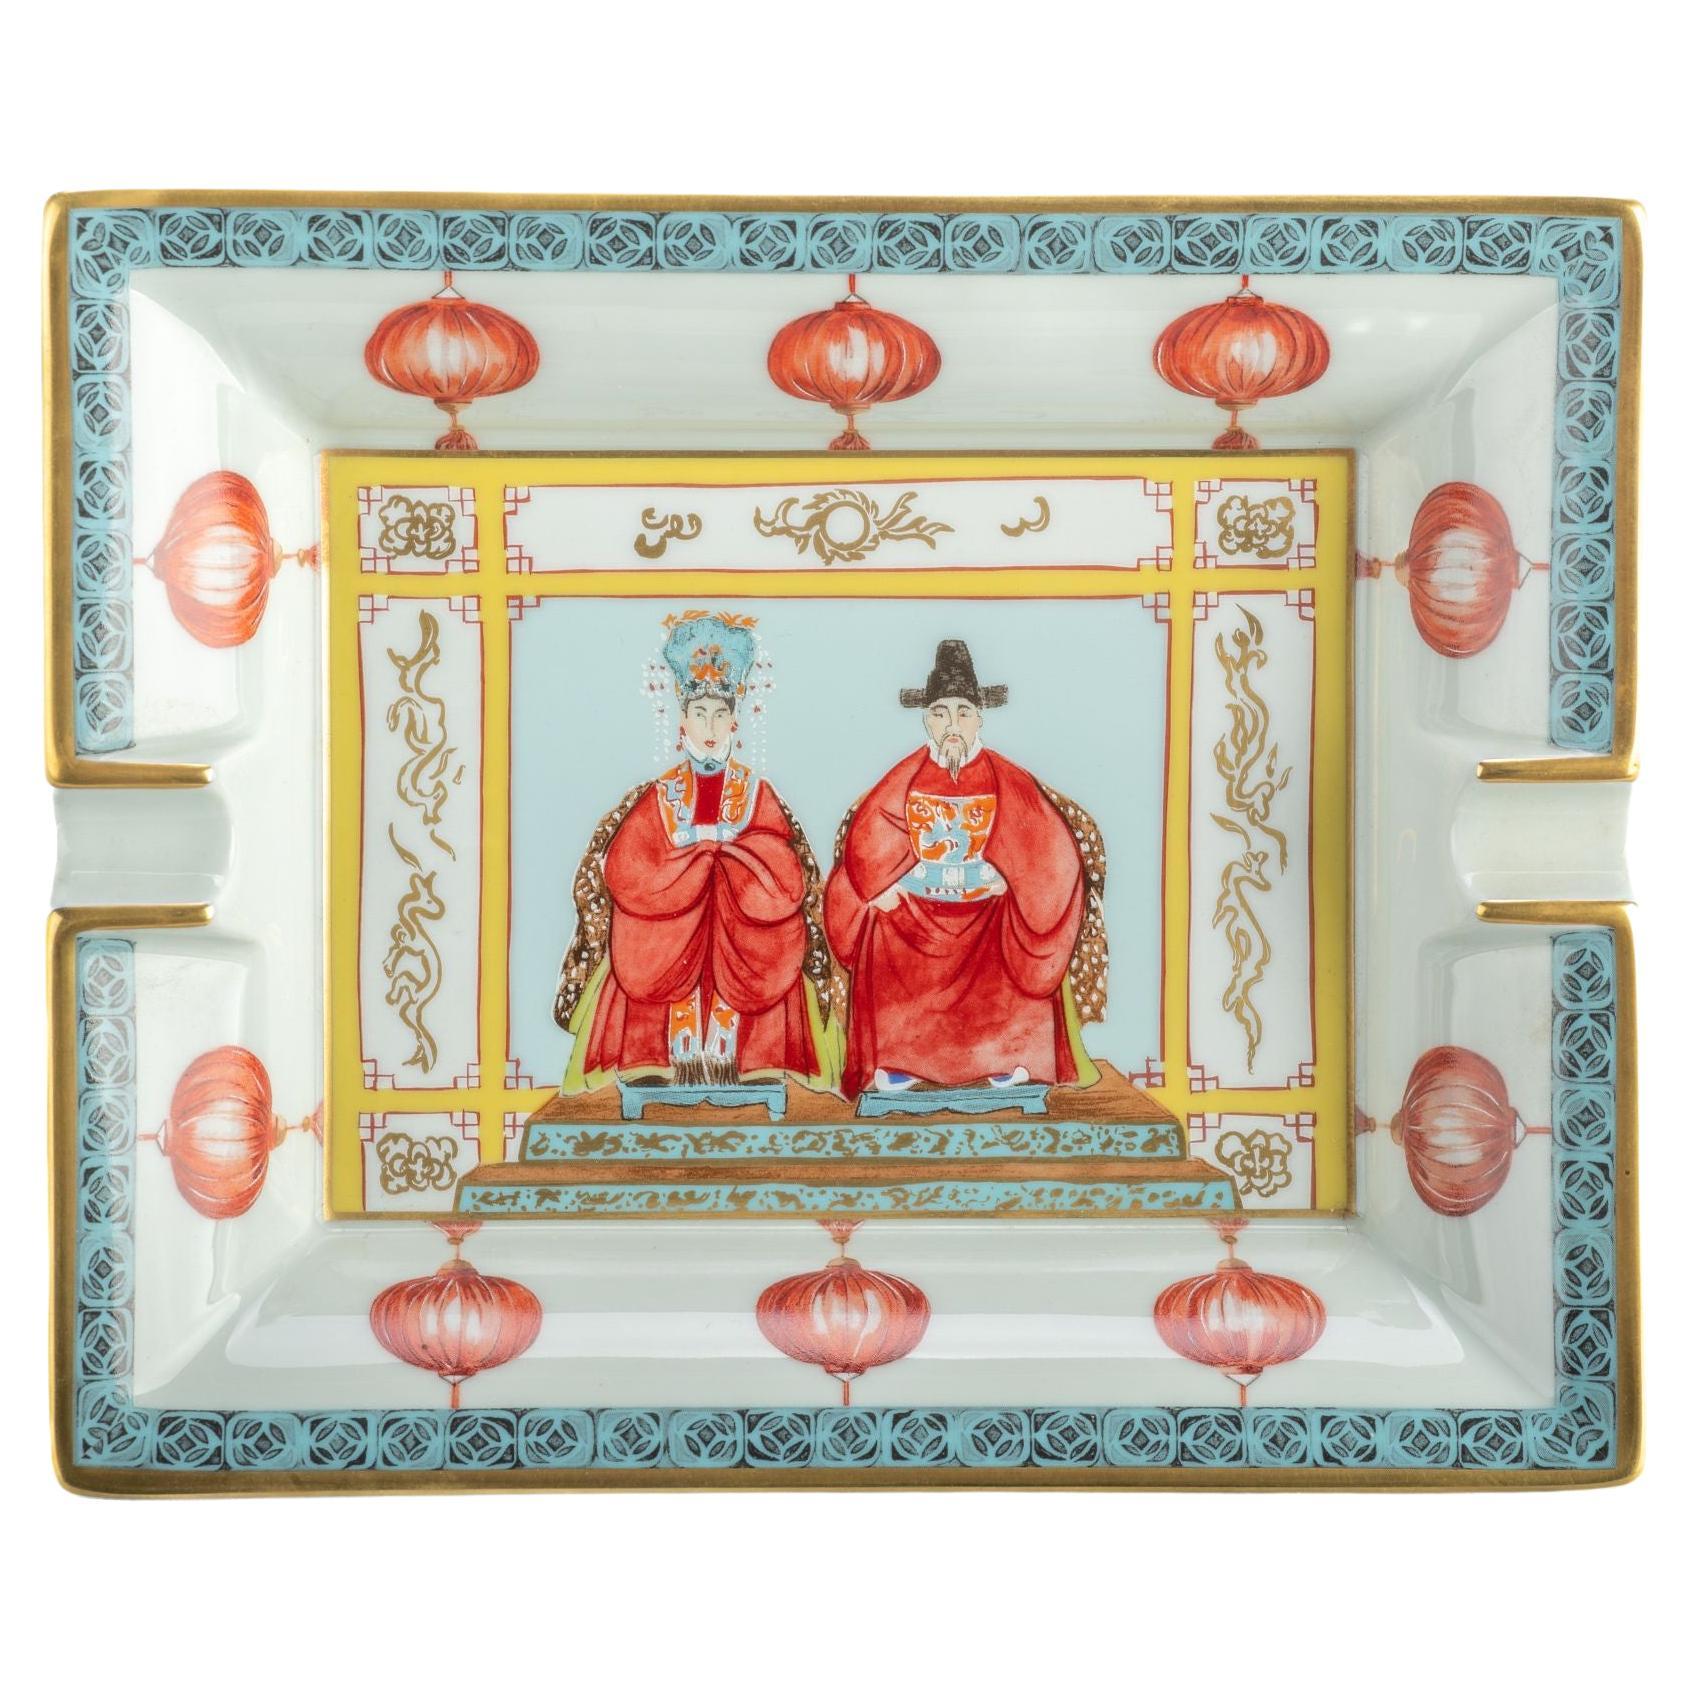 Hermes Chinese Figures Porcelain Ashtray For Sale